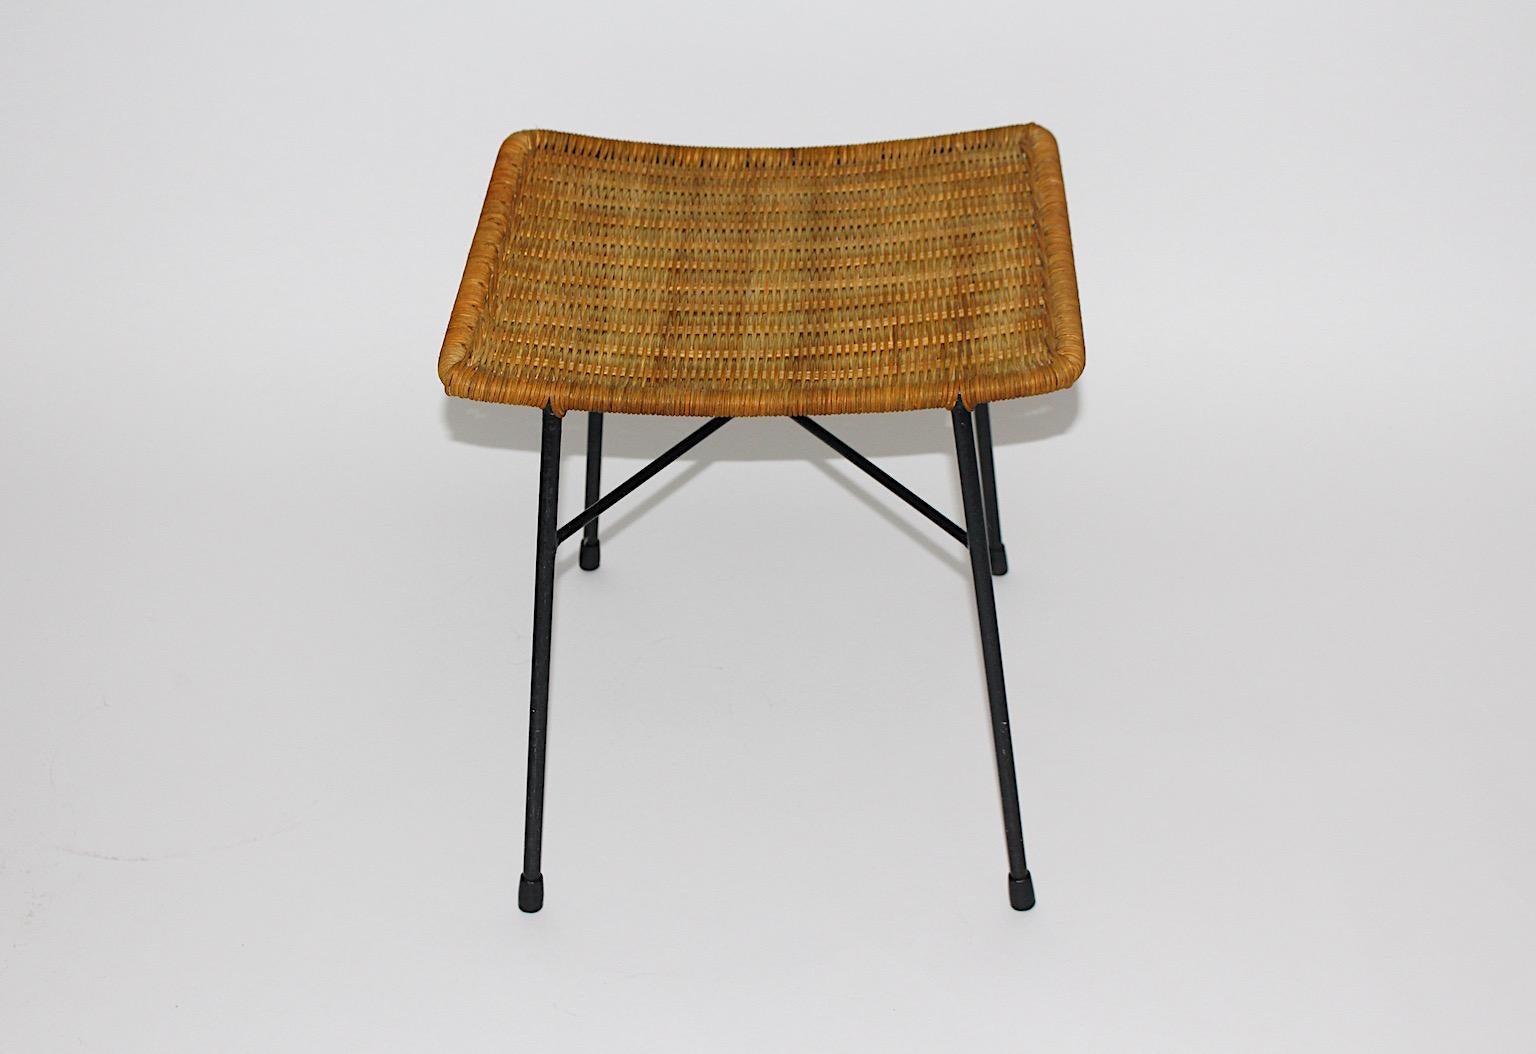 Mid Century Modern vintage organic stool or ottoman or footstool from rattan and black lacquered metal frame 1950s Austria.
While the slightly curved seat shows wonderful organic rattan network, the black lacquered metal frame features a crossed